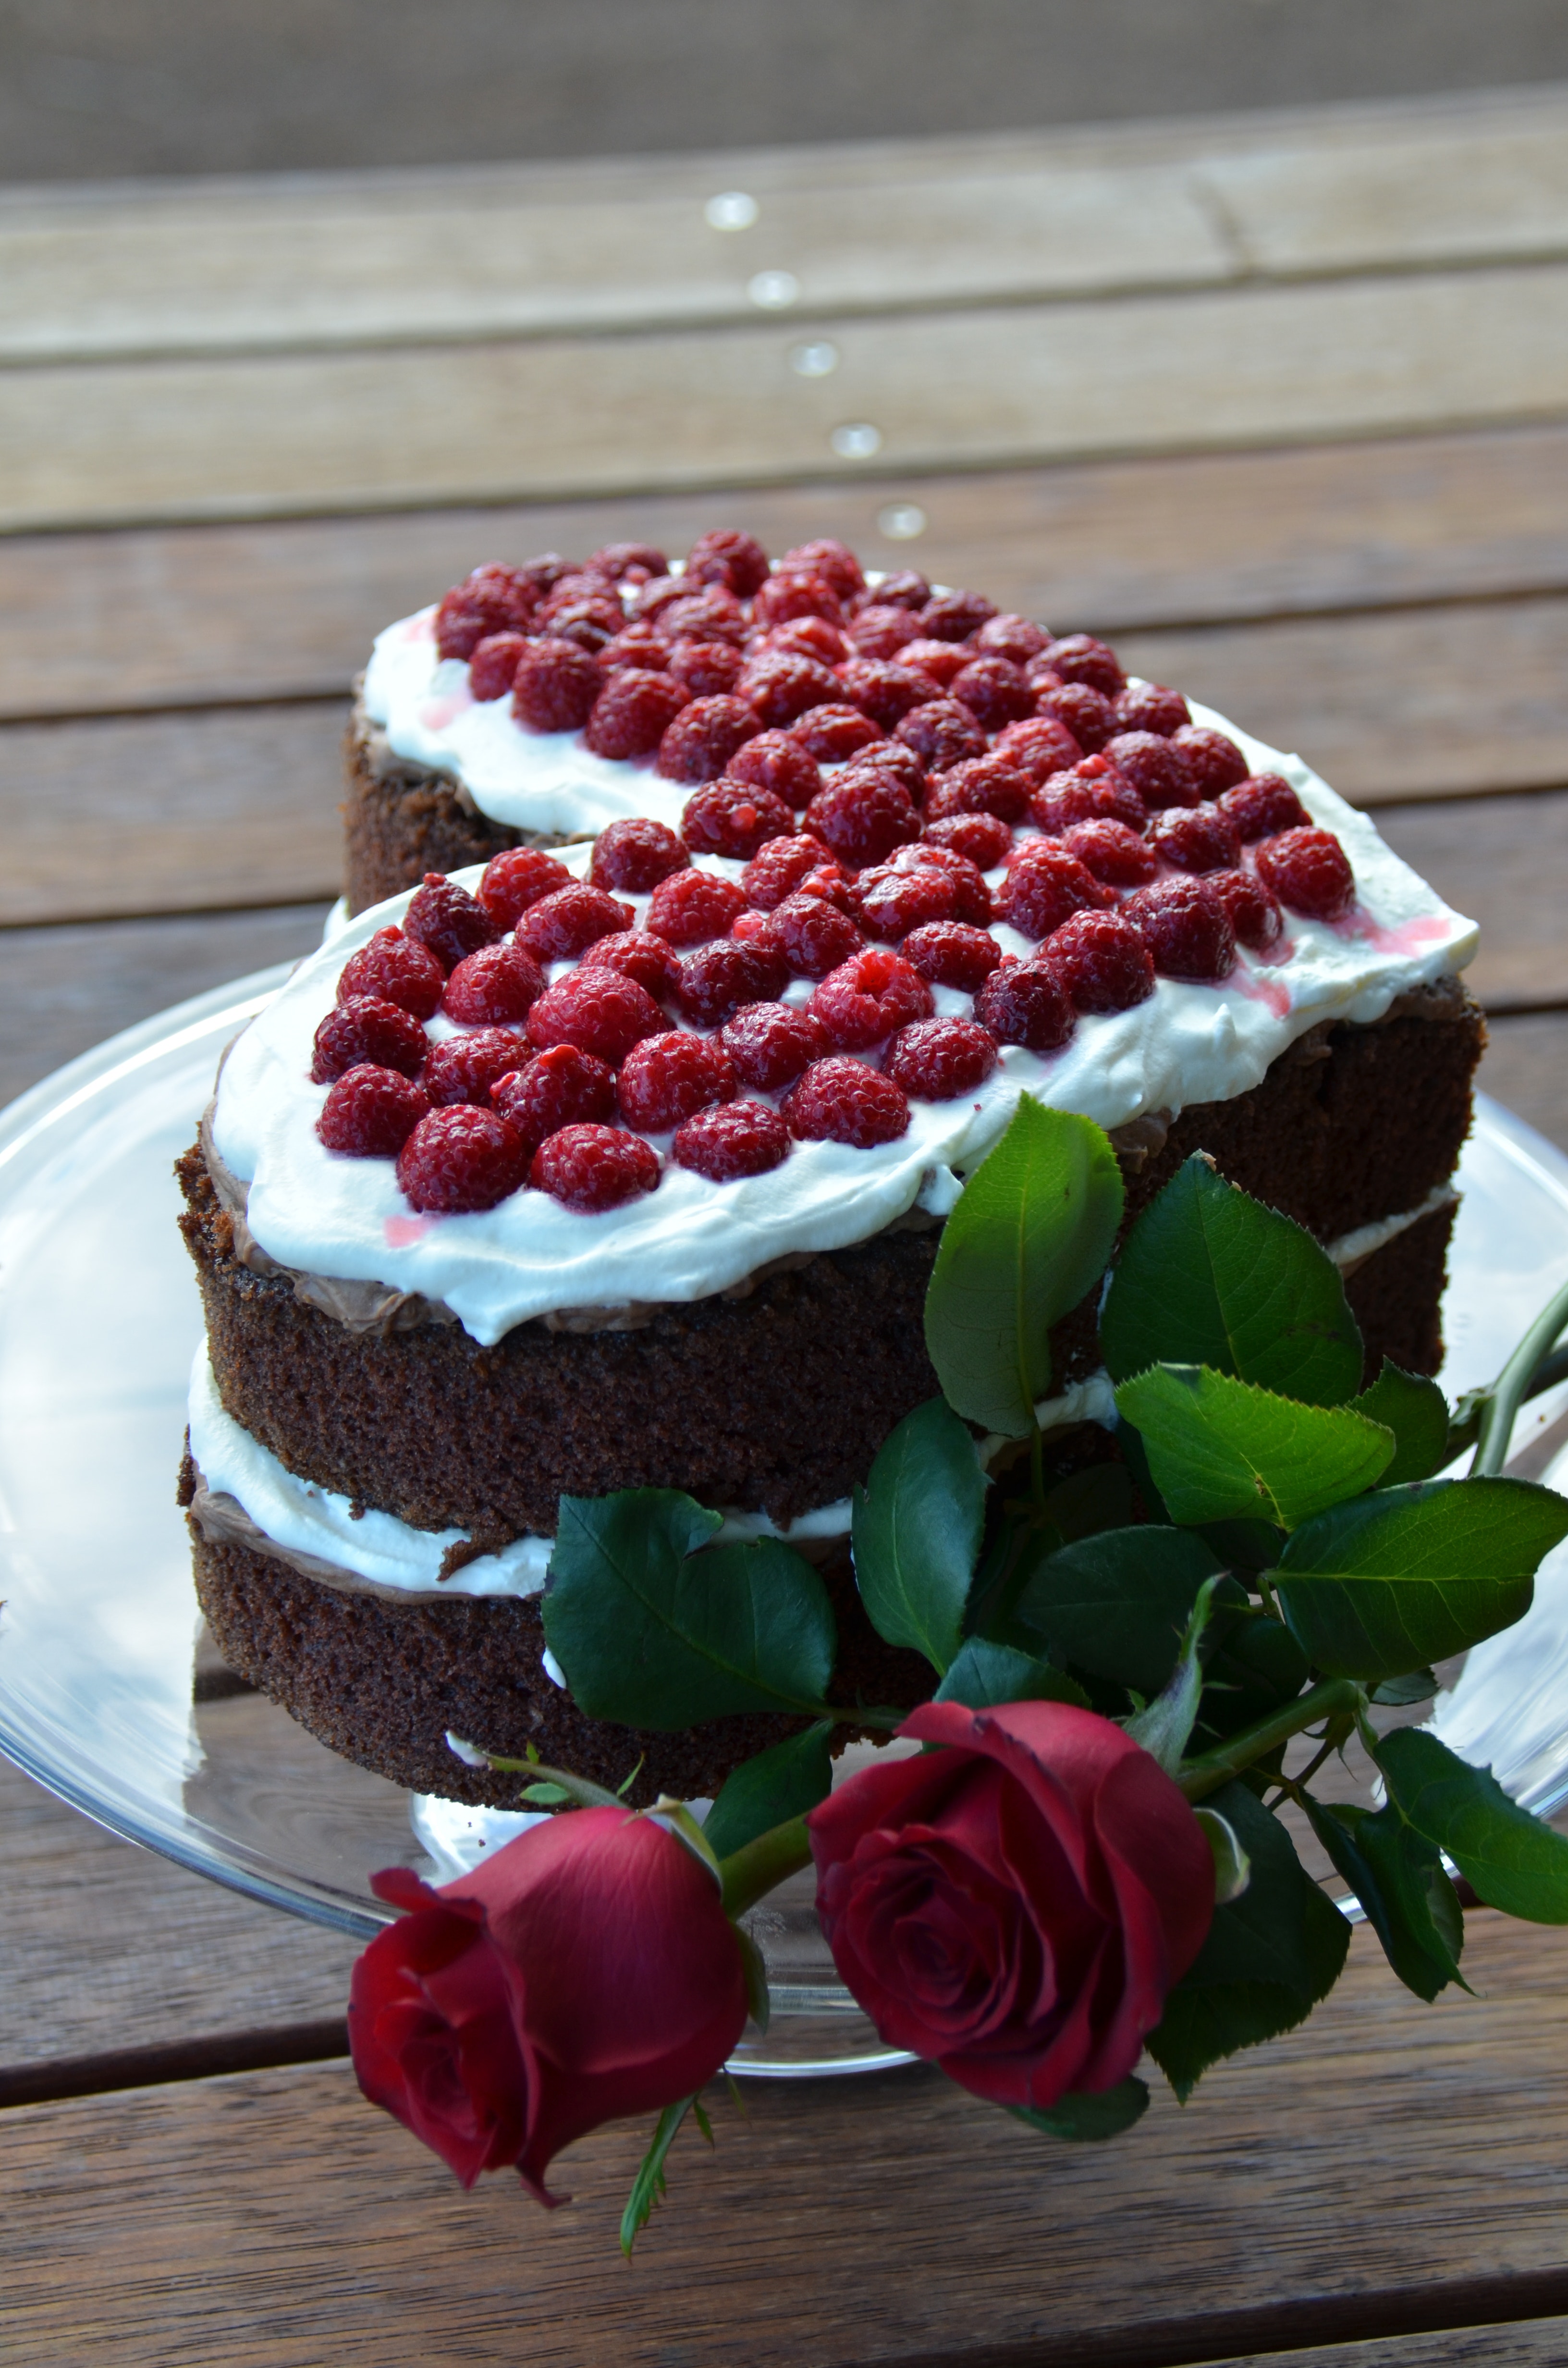 Free of heart shaped chocolate cake, red roses